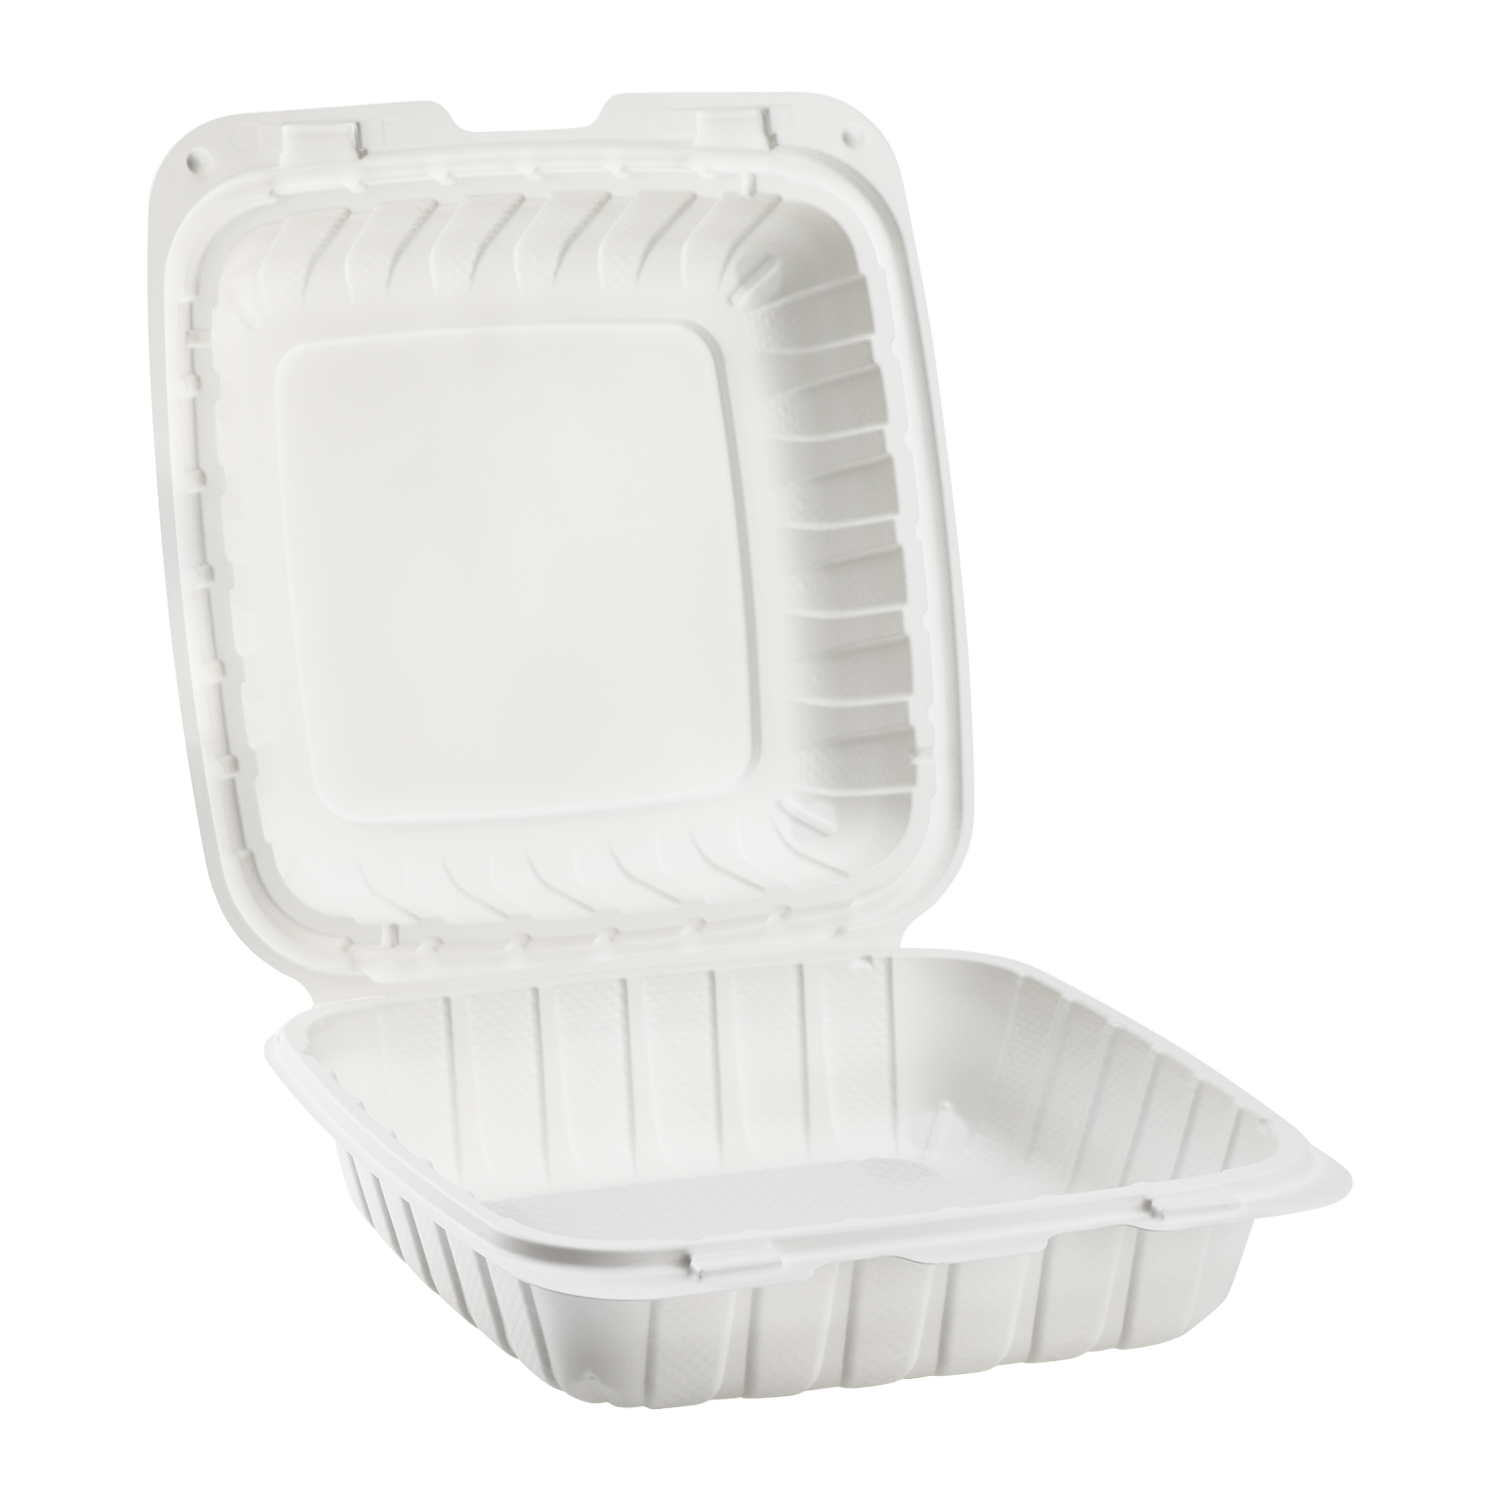 White plastic containers. Food container, packaging for take away